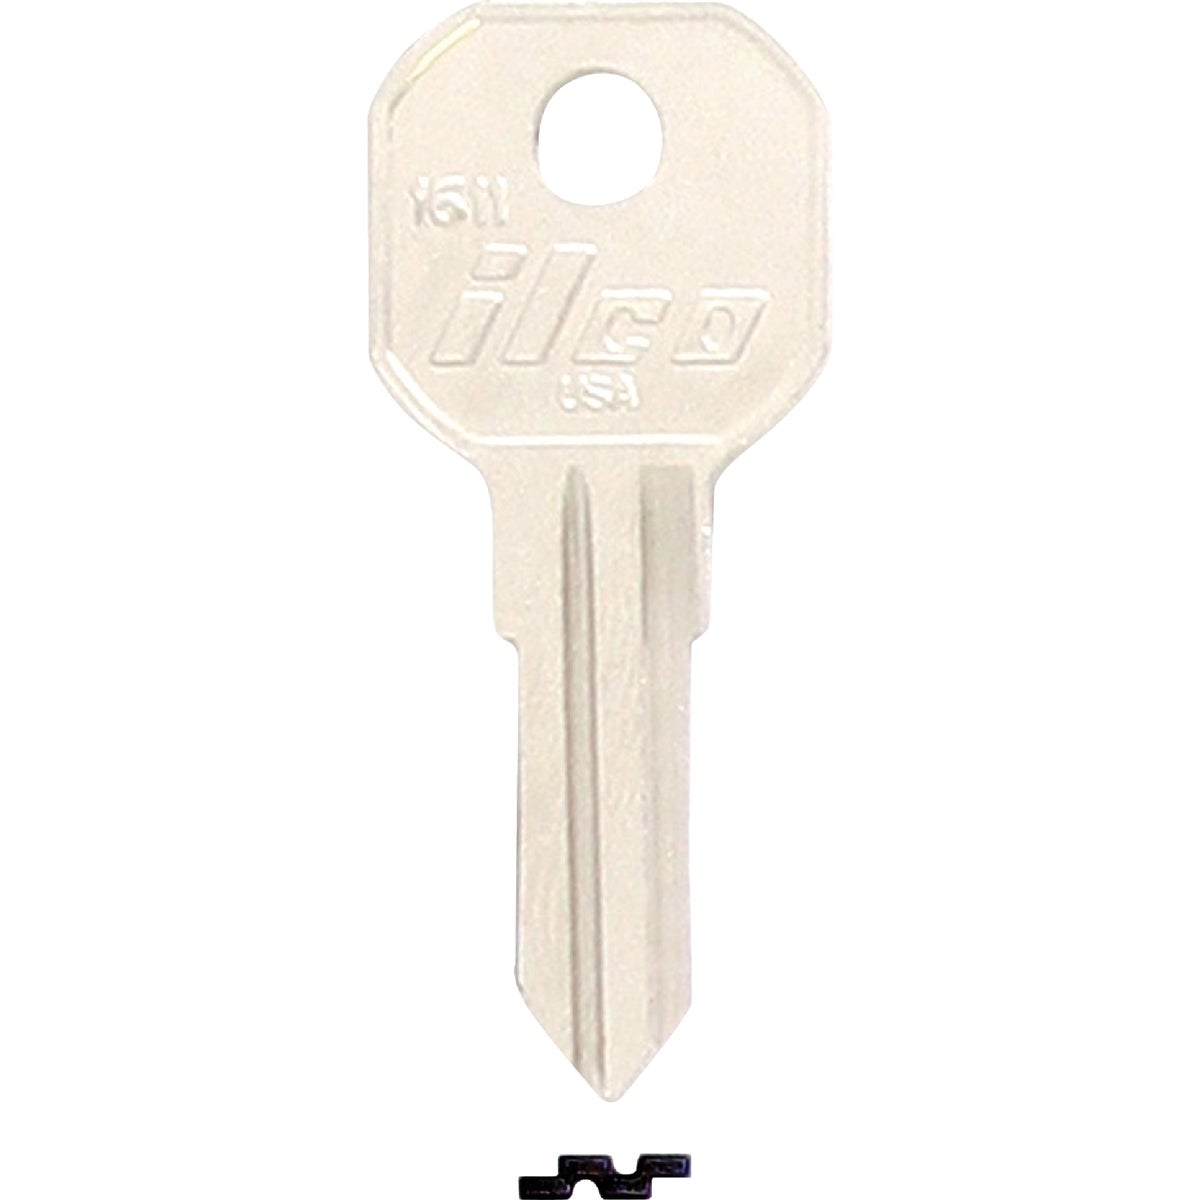 Item 212969, Nickel-plated key blank. When you order one, you will receive 10 keys.